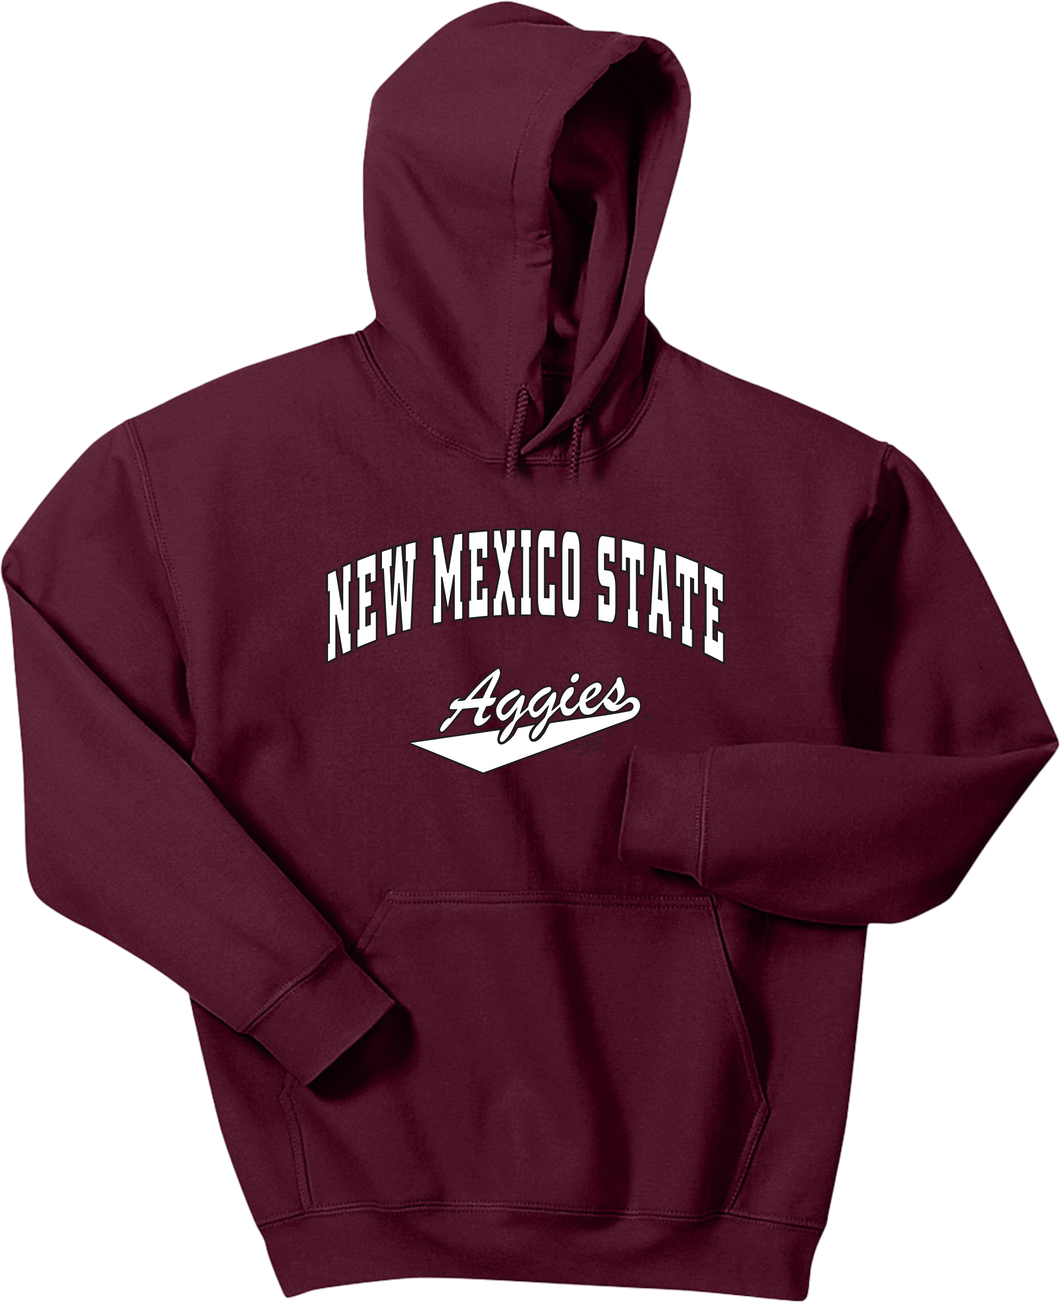 New Mexico STATE Pullover Hooded Sweatshirt